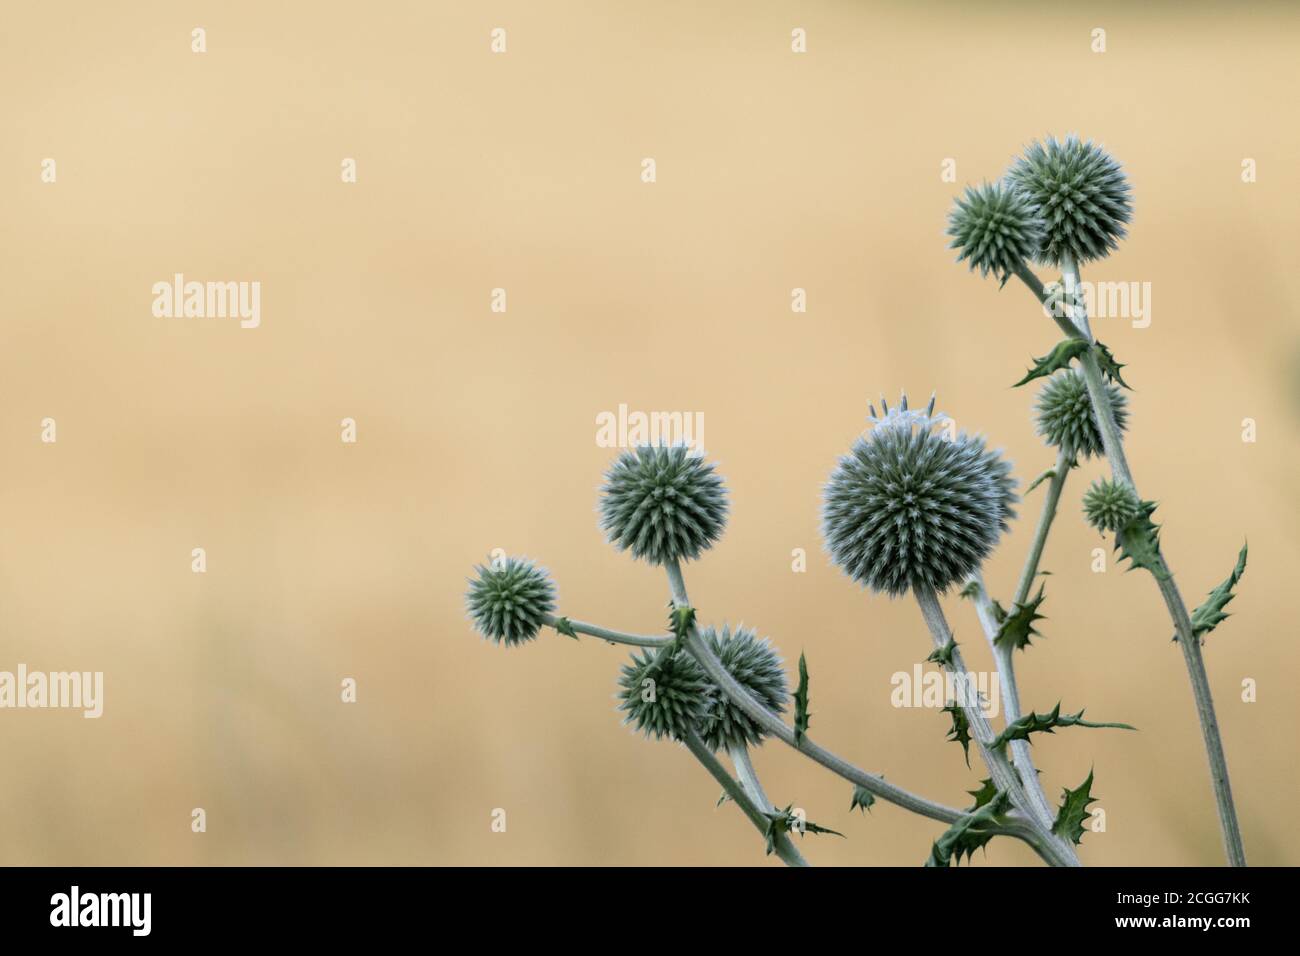 Globe thistle ball-shaped green flowers macro. Echinops ritro wild prickly grass on blurred beige yellow background. Copy space natural detailed herba Stock Photo